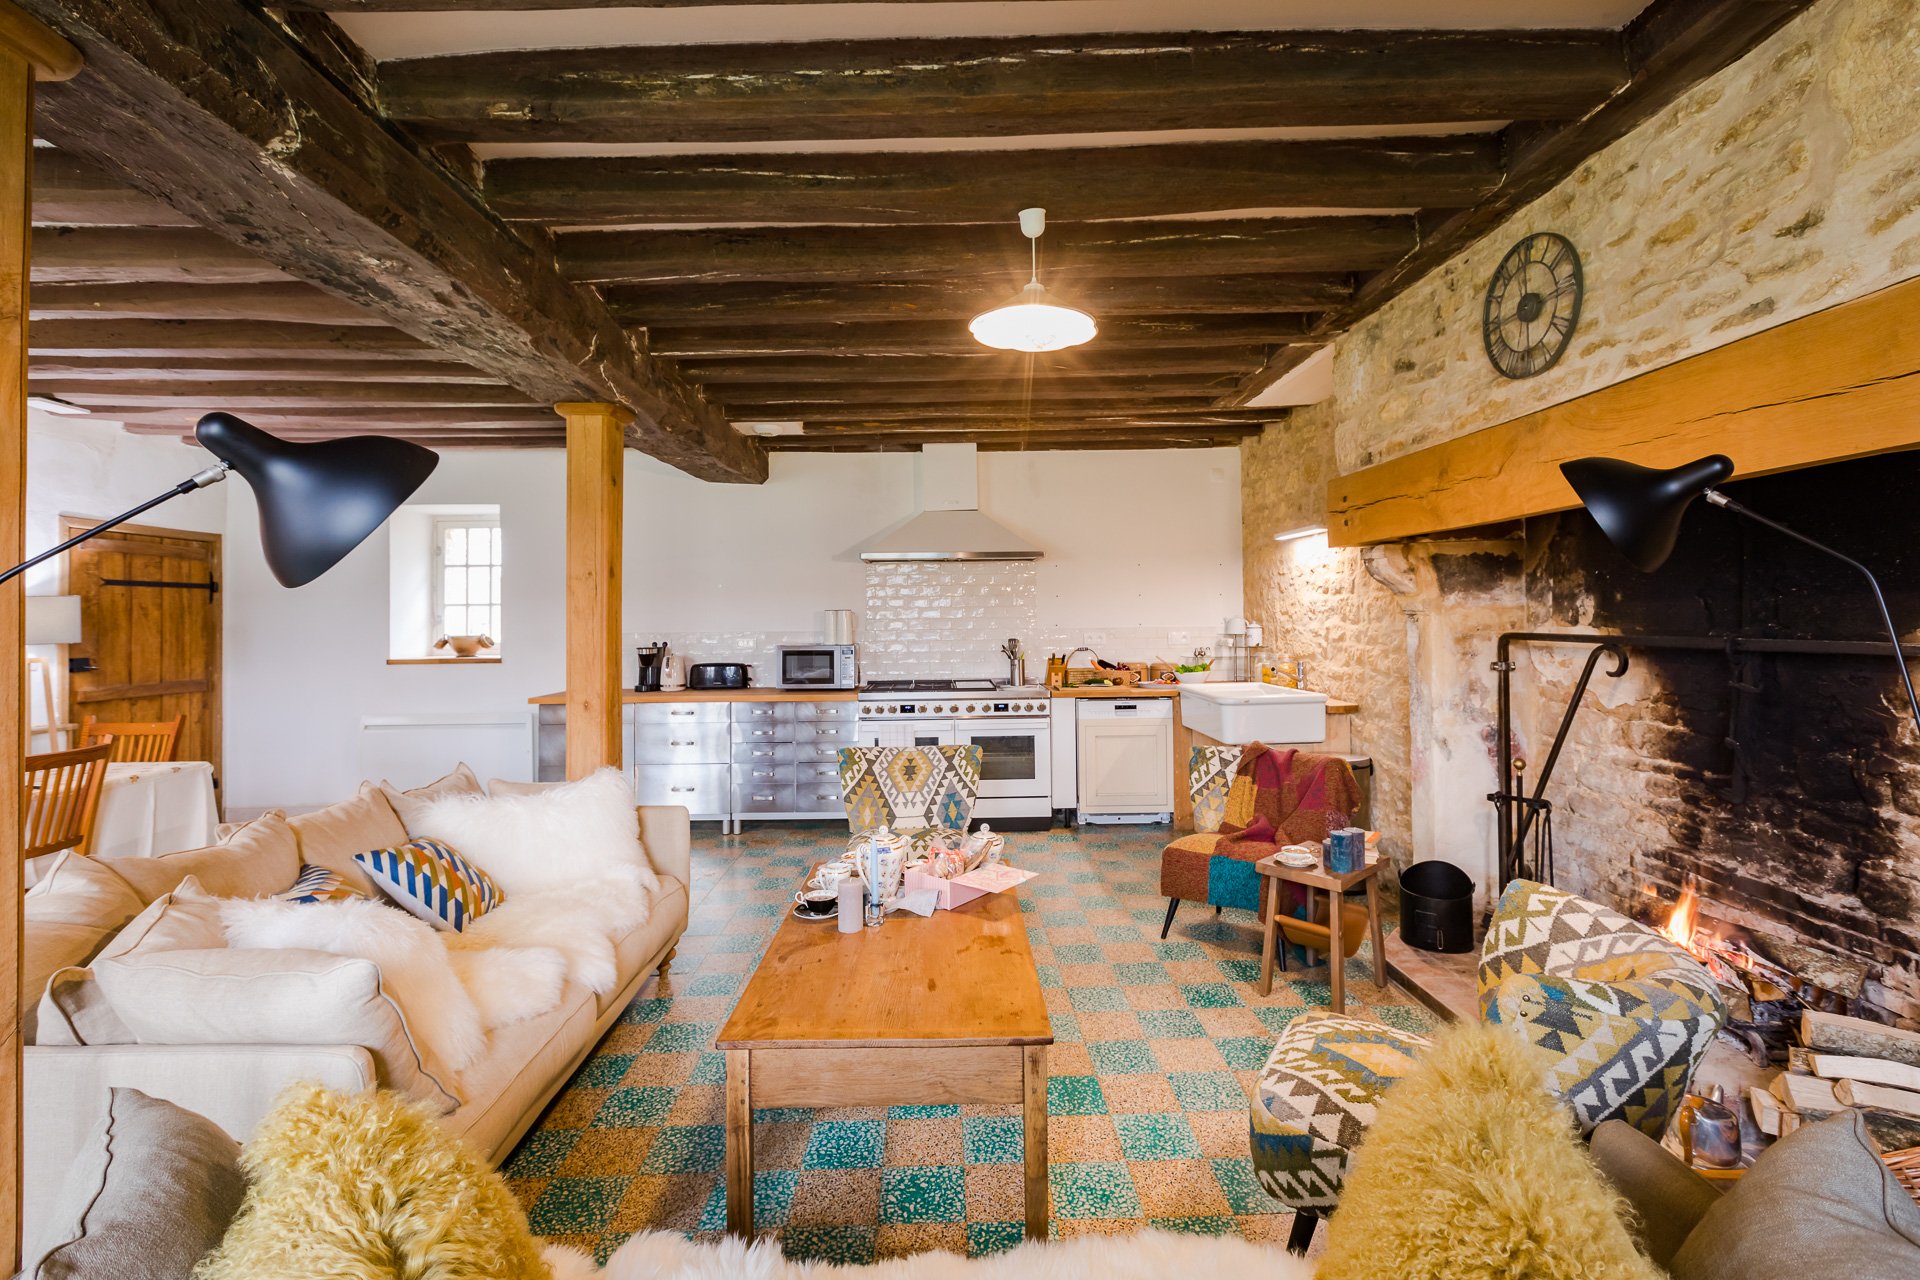 A living room with a stone fireplace and wooden beams in the farmhouse, perfect for a cozy ambiance during a holiday in france.